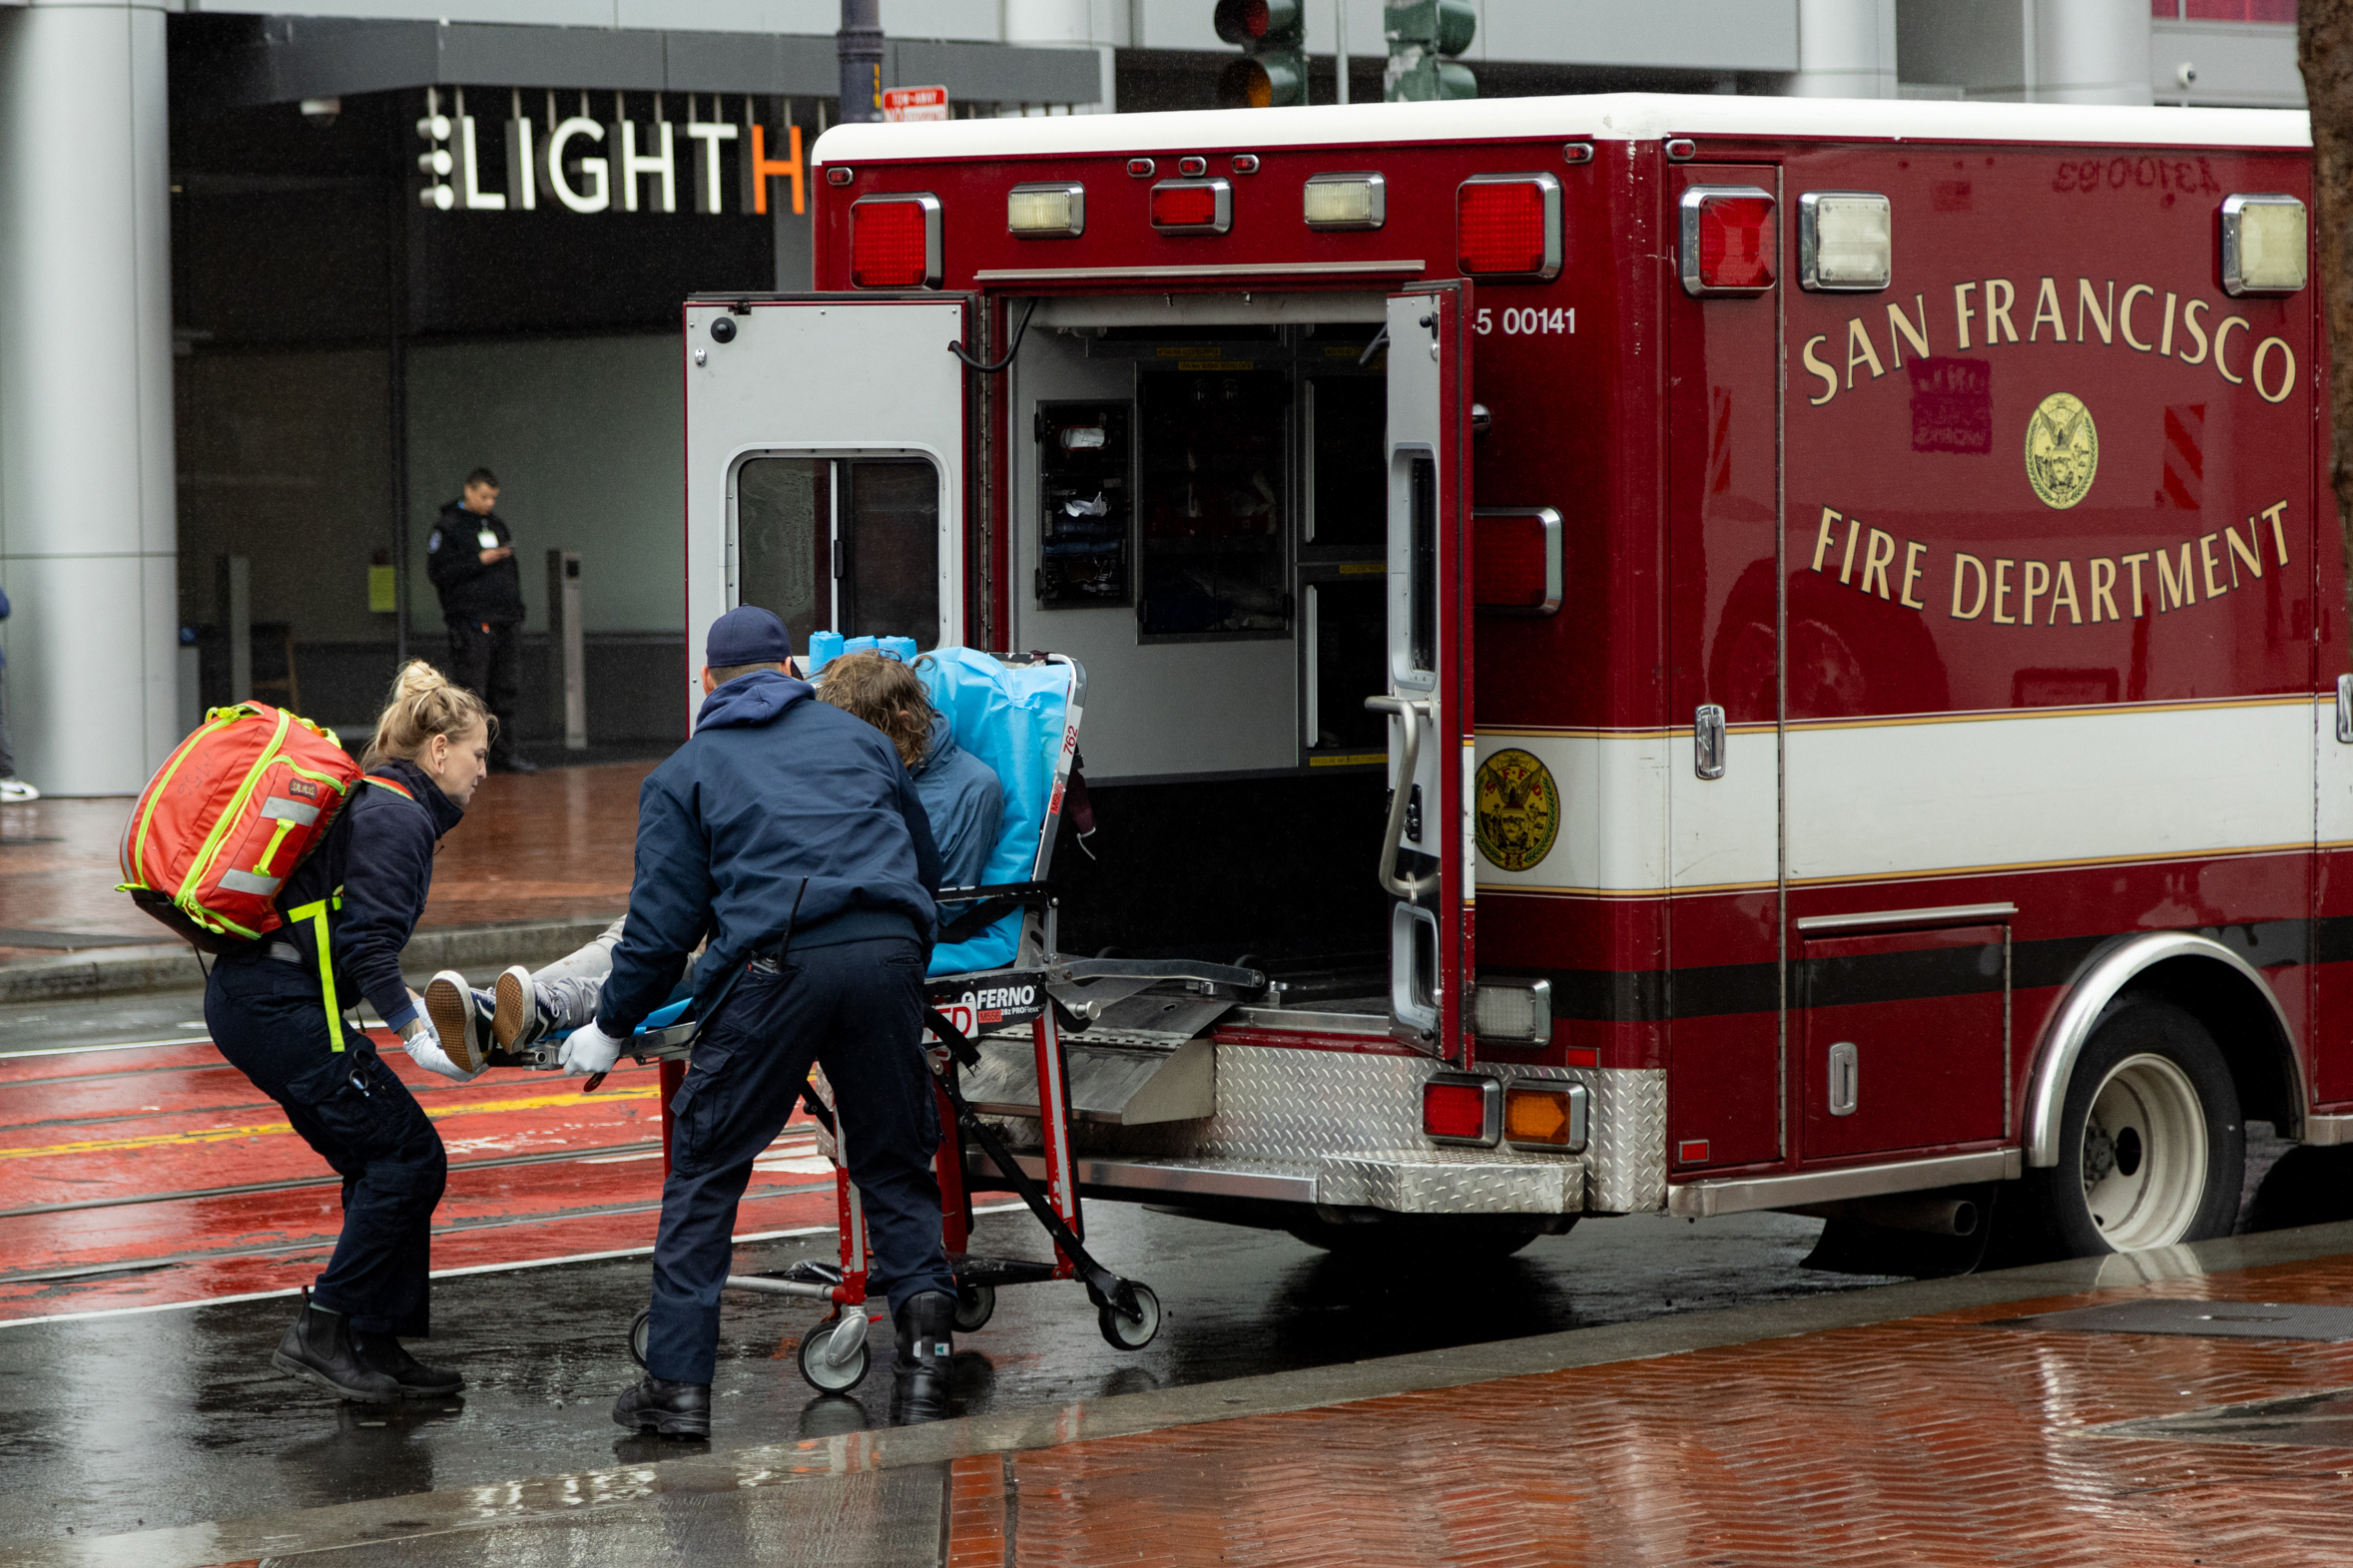 Paramedics load a person on a stretcher into an ambulance labeled &quot;San Francisco Fire Department.&quot;